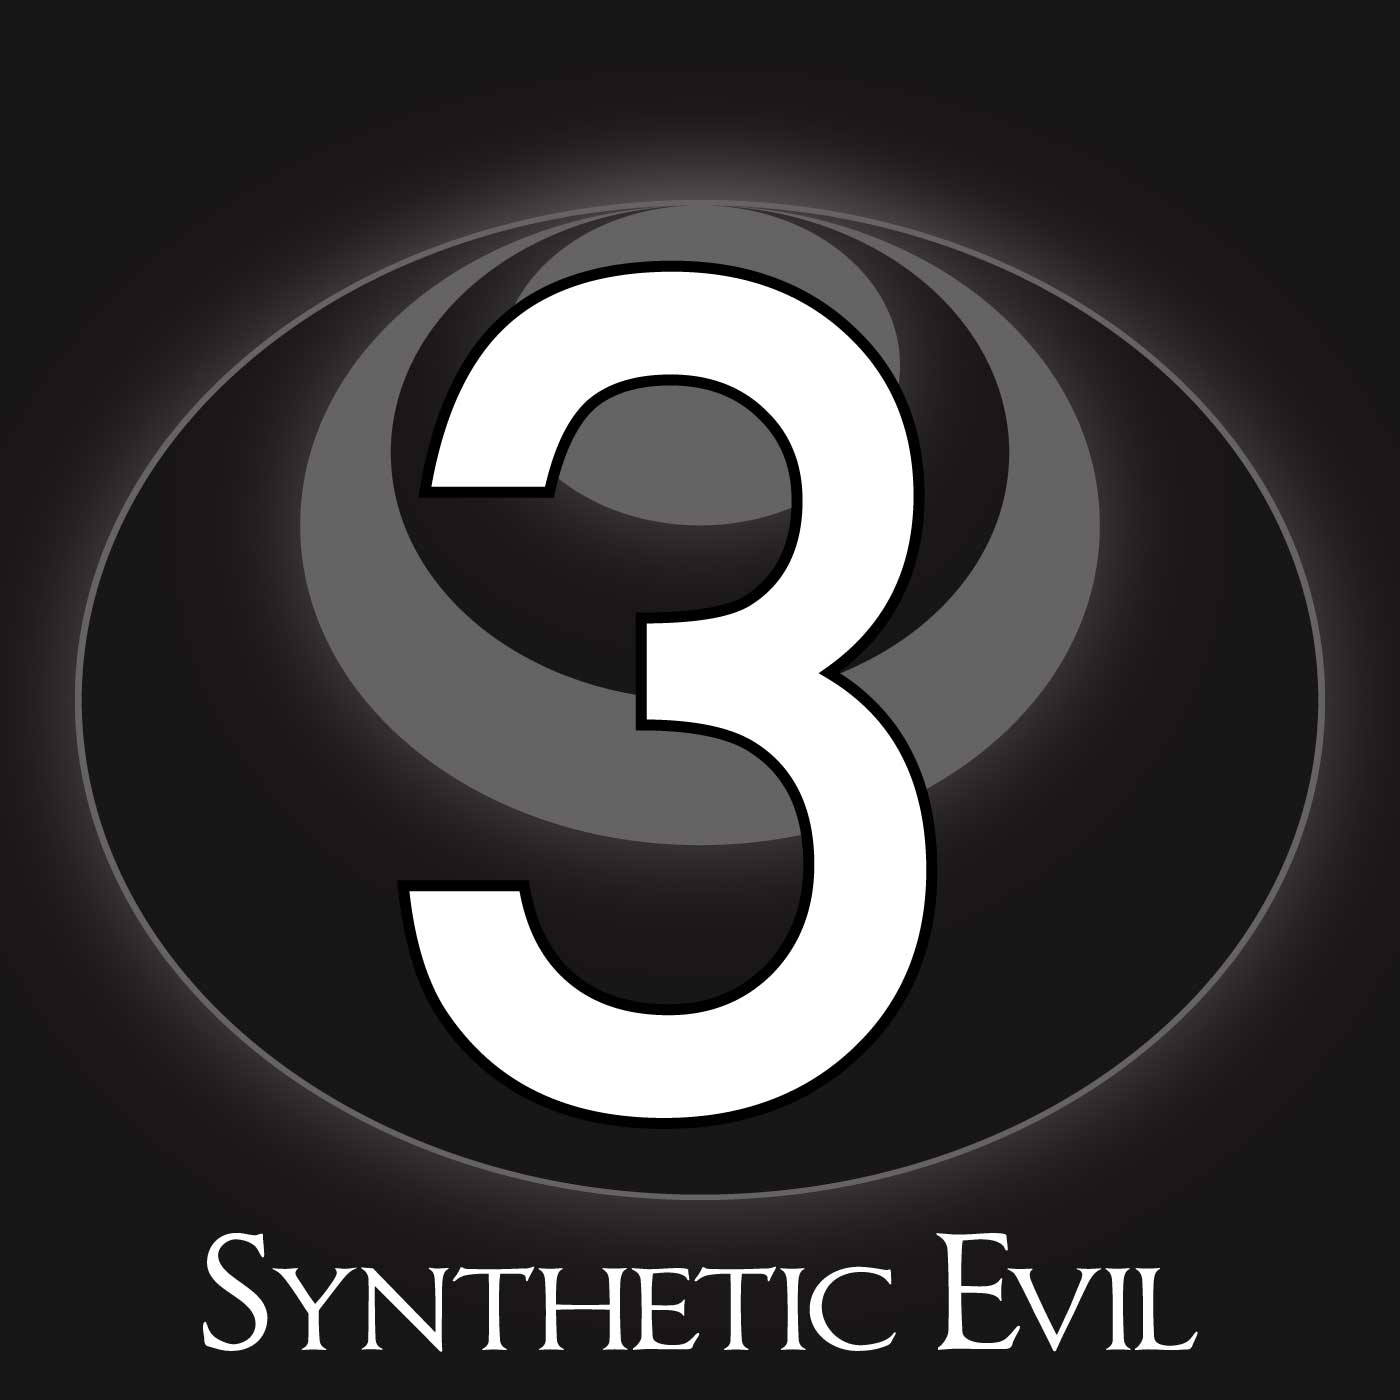 3 – Synthetic Evil